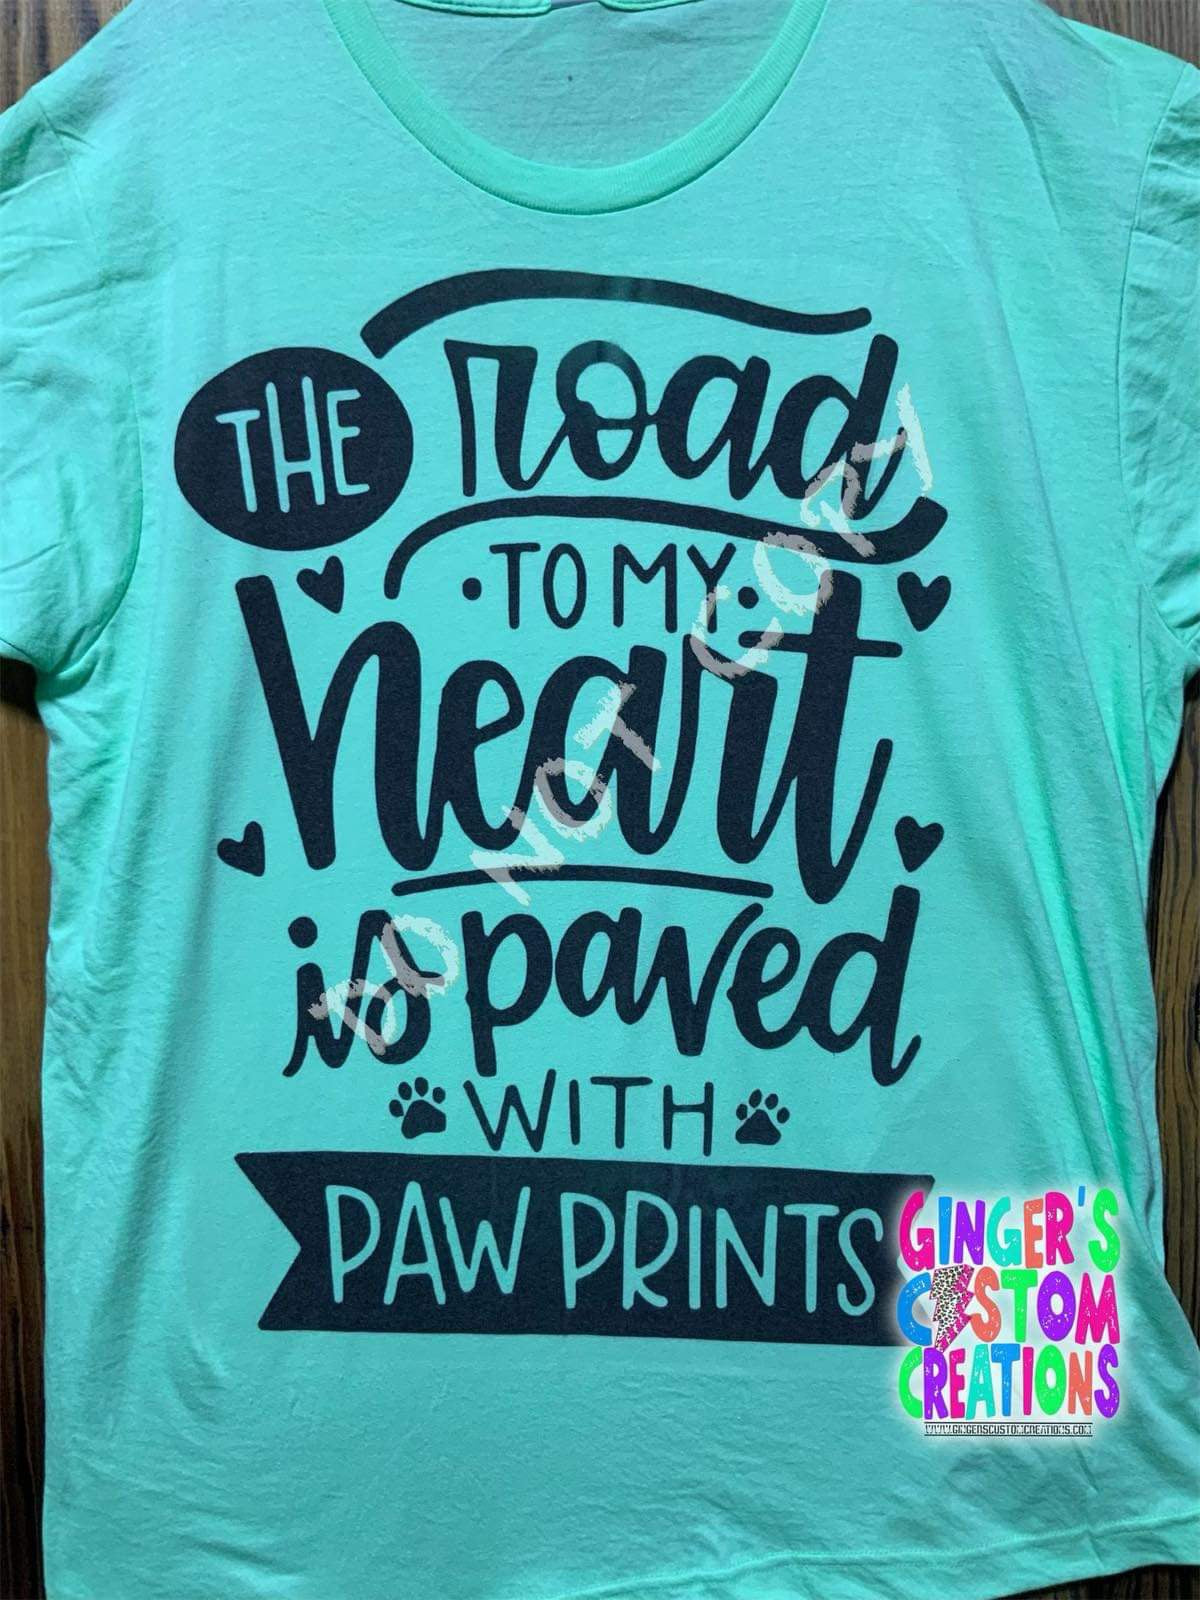 THE ROAD TO MY HEART IS PAVED WITH PAW PRINTS SHIRT